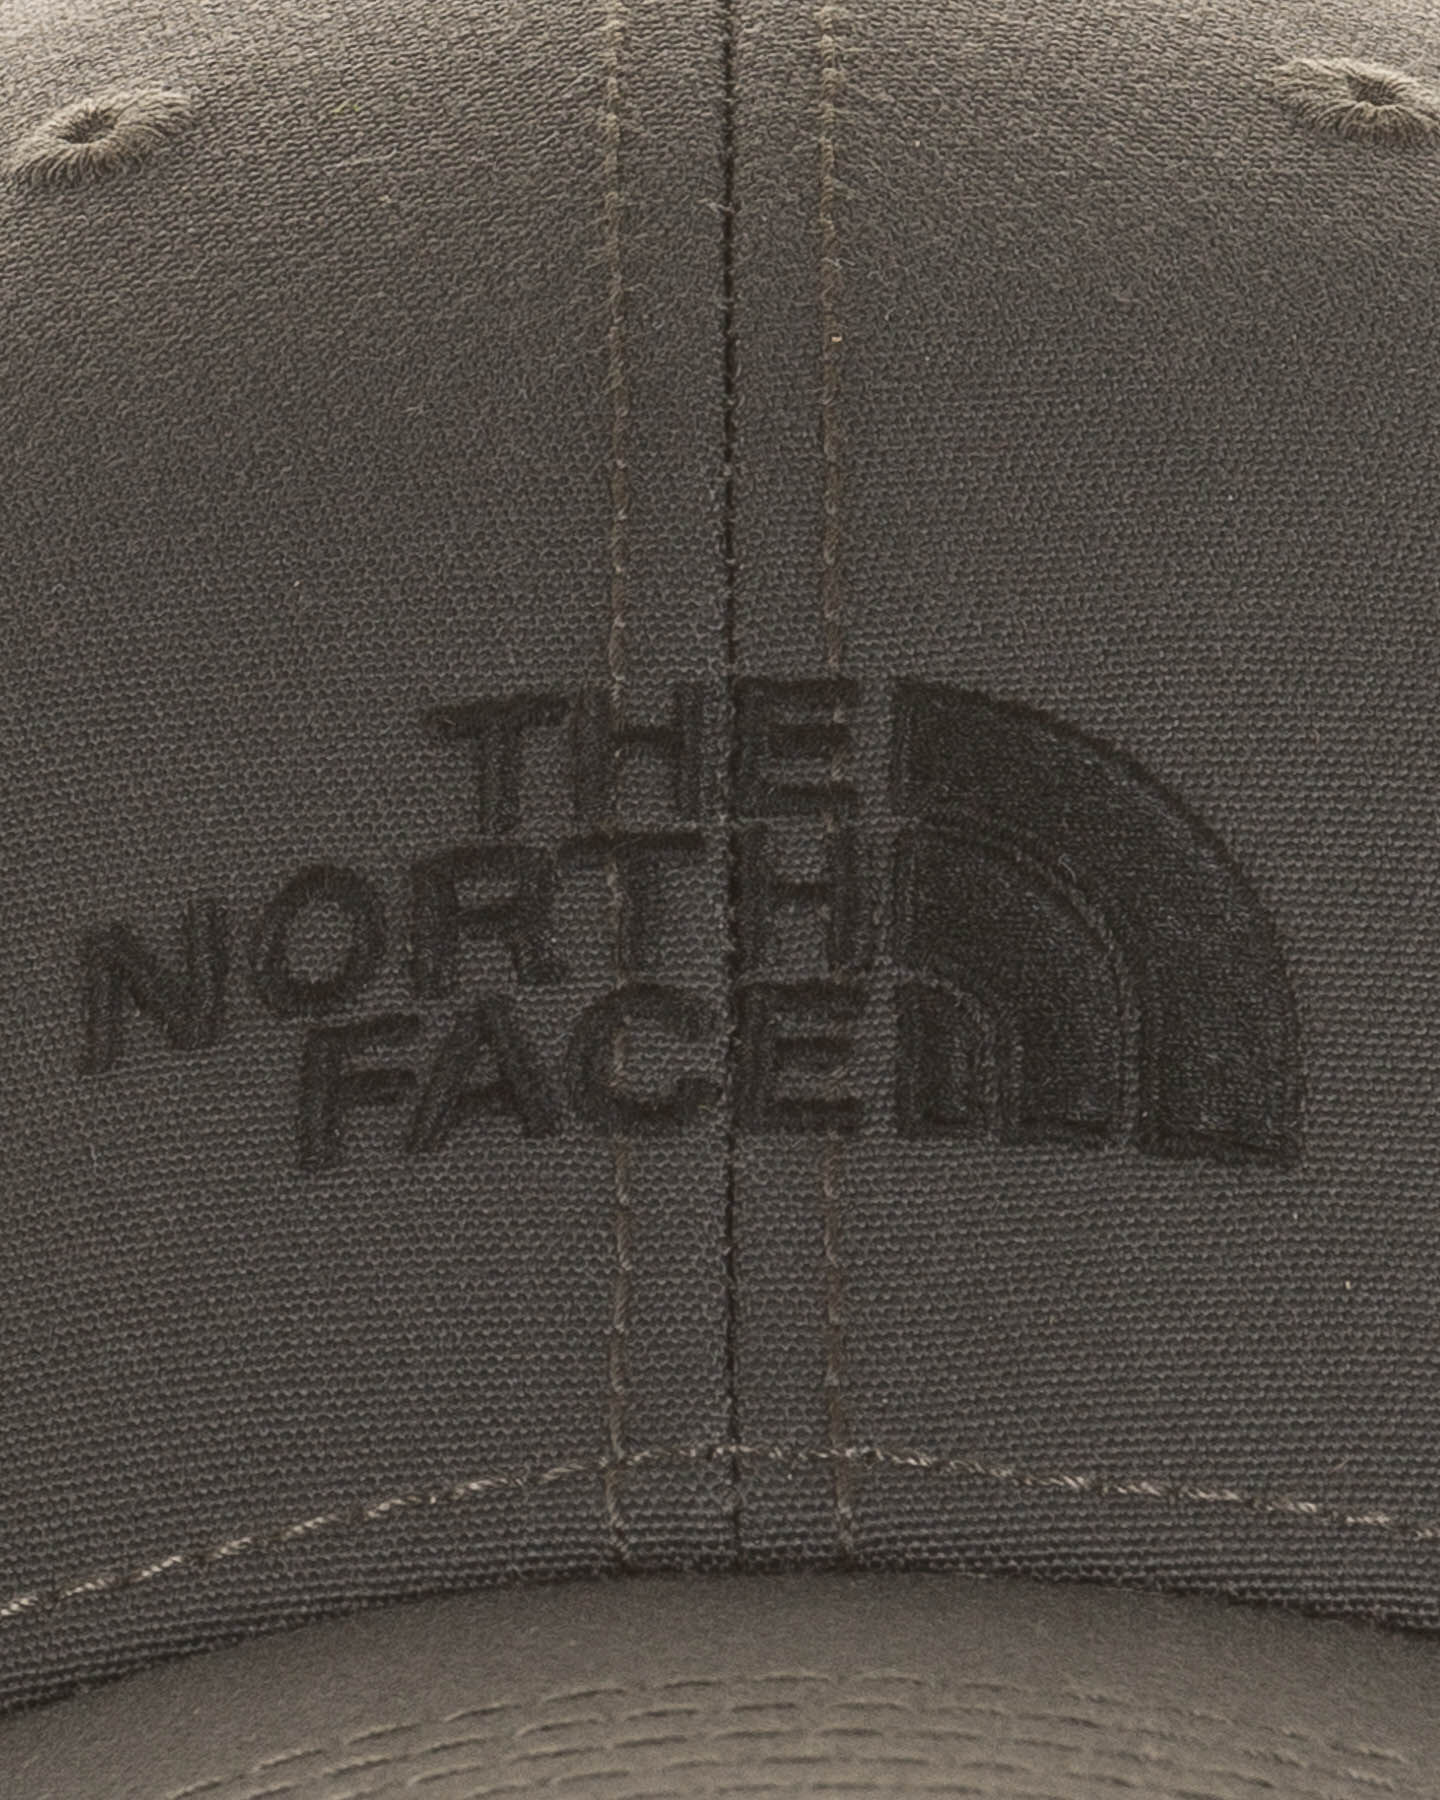  Cappellino THE NORTH FACE RECYCLED 66 CLASSIC S5422430|0C5|OS scatto 2